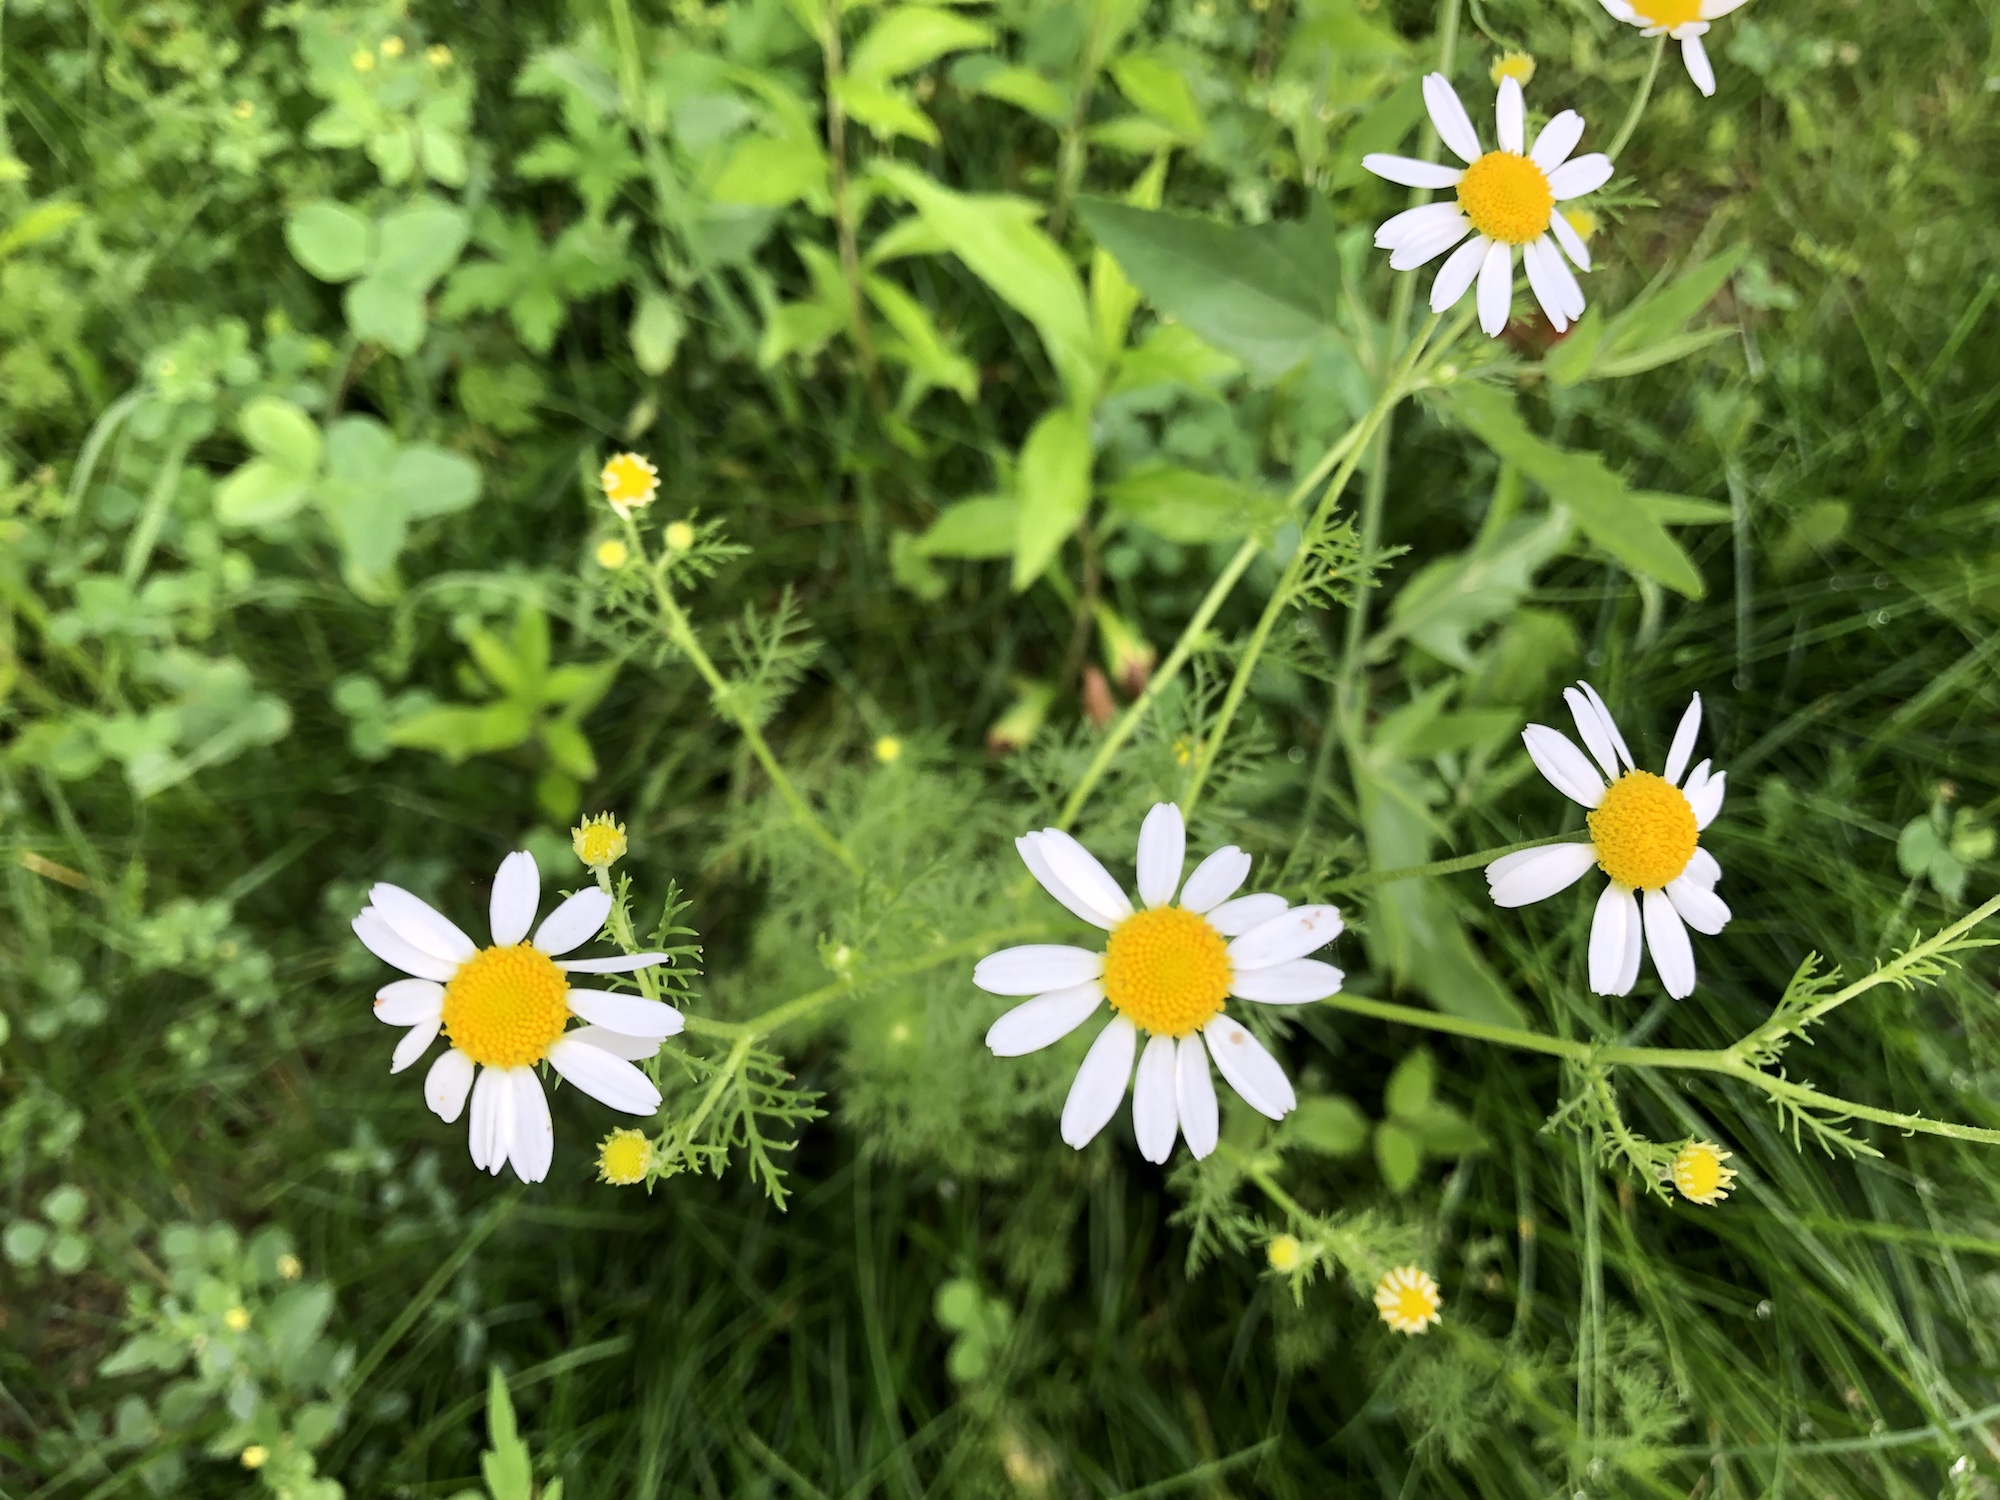 Chamomile in grass between Monroe Street sidewalk and Marion Dunn woods in Madison, Wisconsin on June 30, 2019.